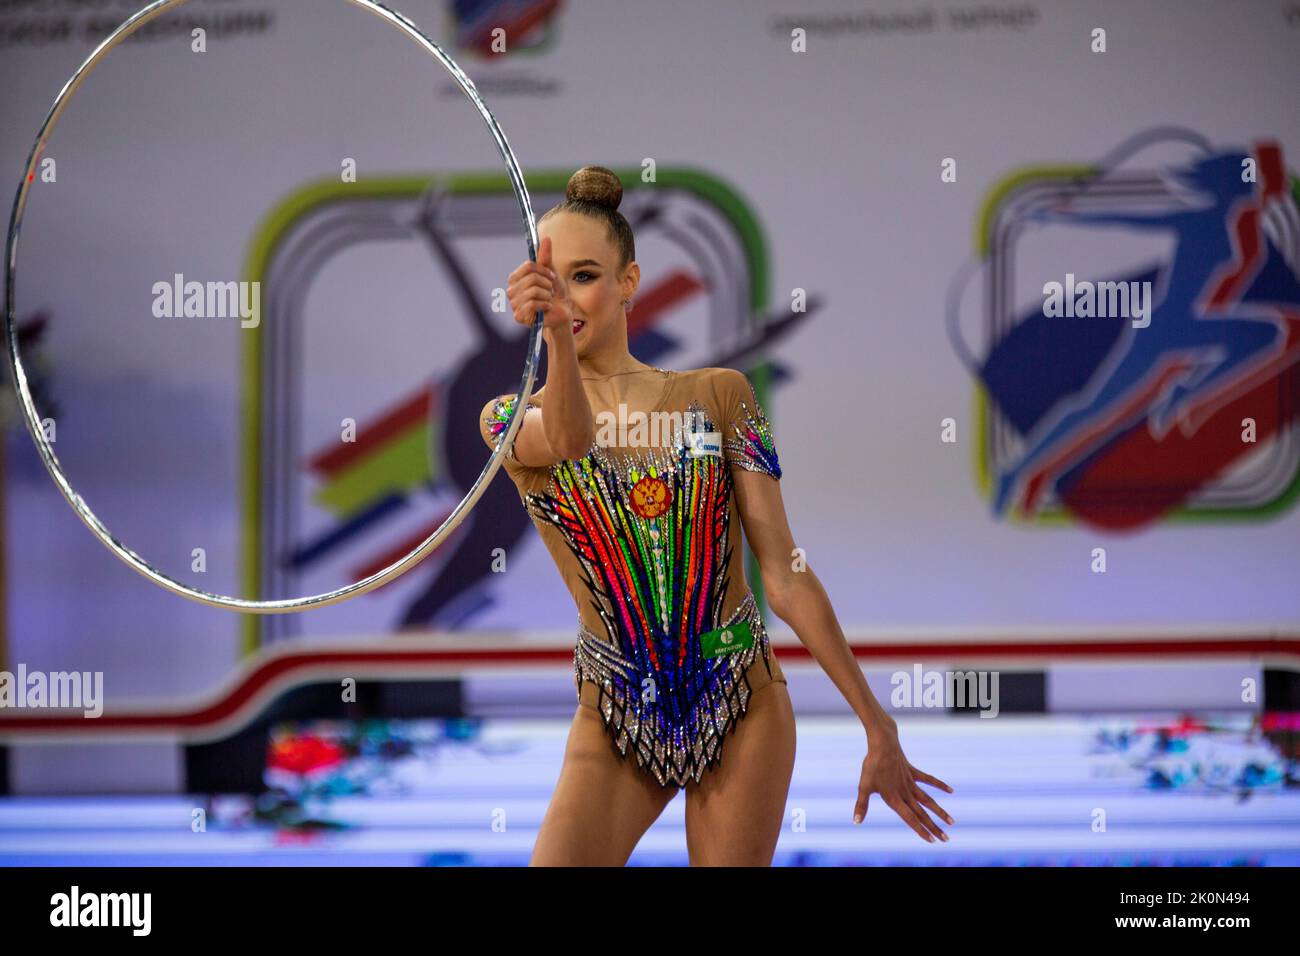 Moscow, Russia. 12th of September, 2022. Alexandra Skubova performs her hoop routine in a qualification at the 2022 All-Russian Summer Spartakiad in Rhythmic Gymnastics at Irina Viner-Usmanova Gymnastics Palace in Luzhniki in Moscow, Russia. Nikolay Vinokurov/Alamy Live News Stock Photo